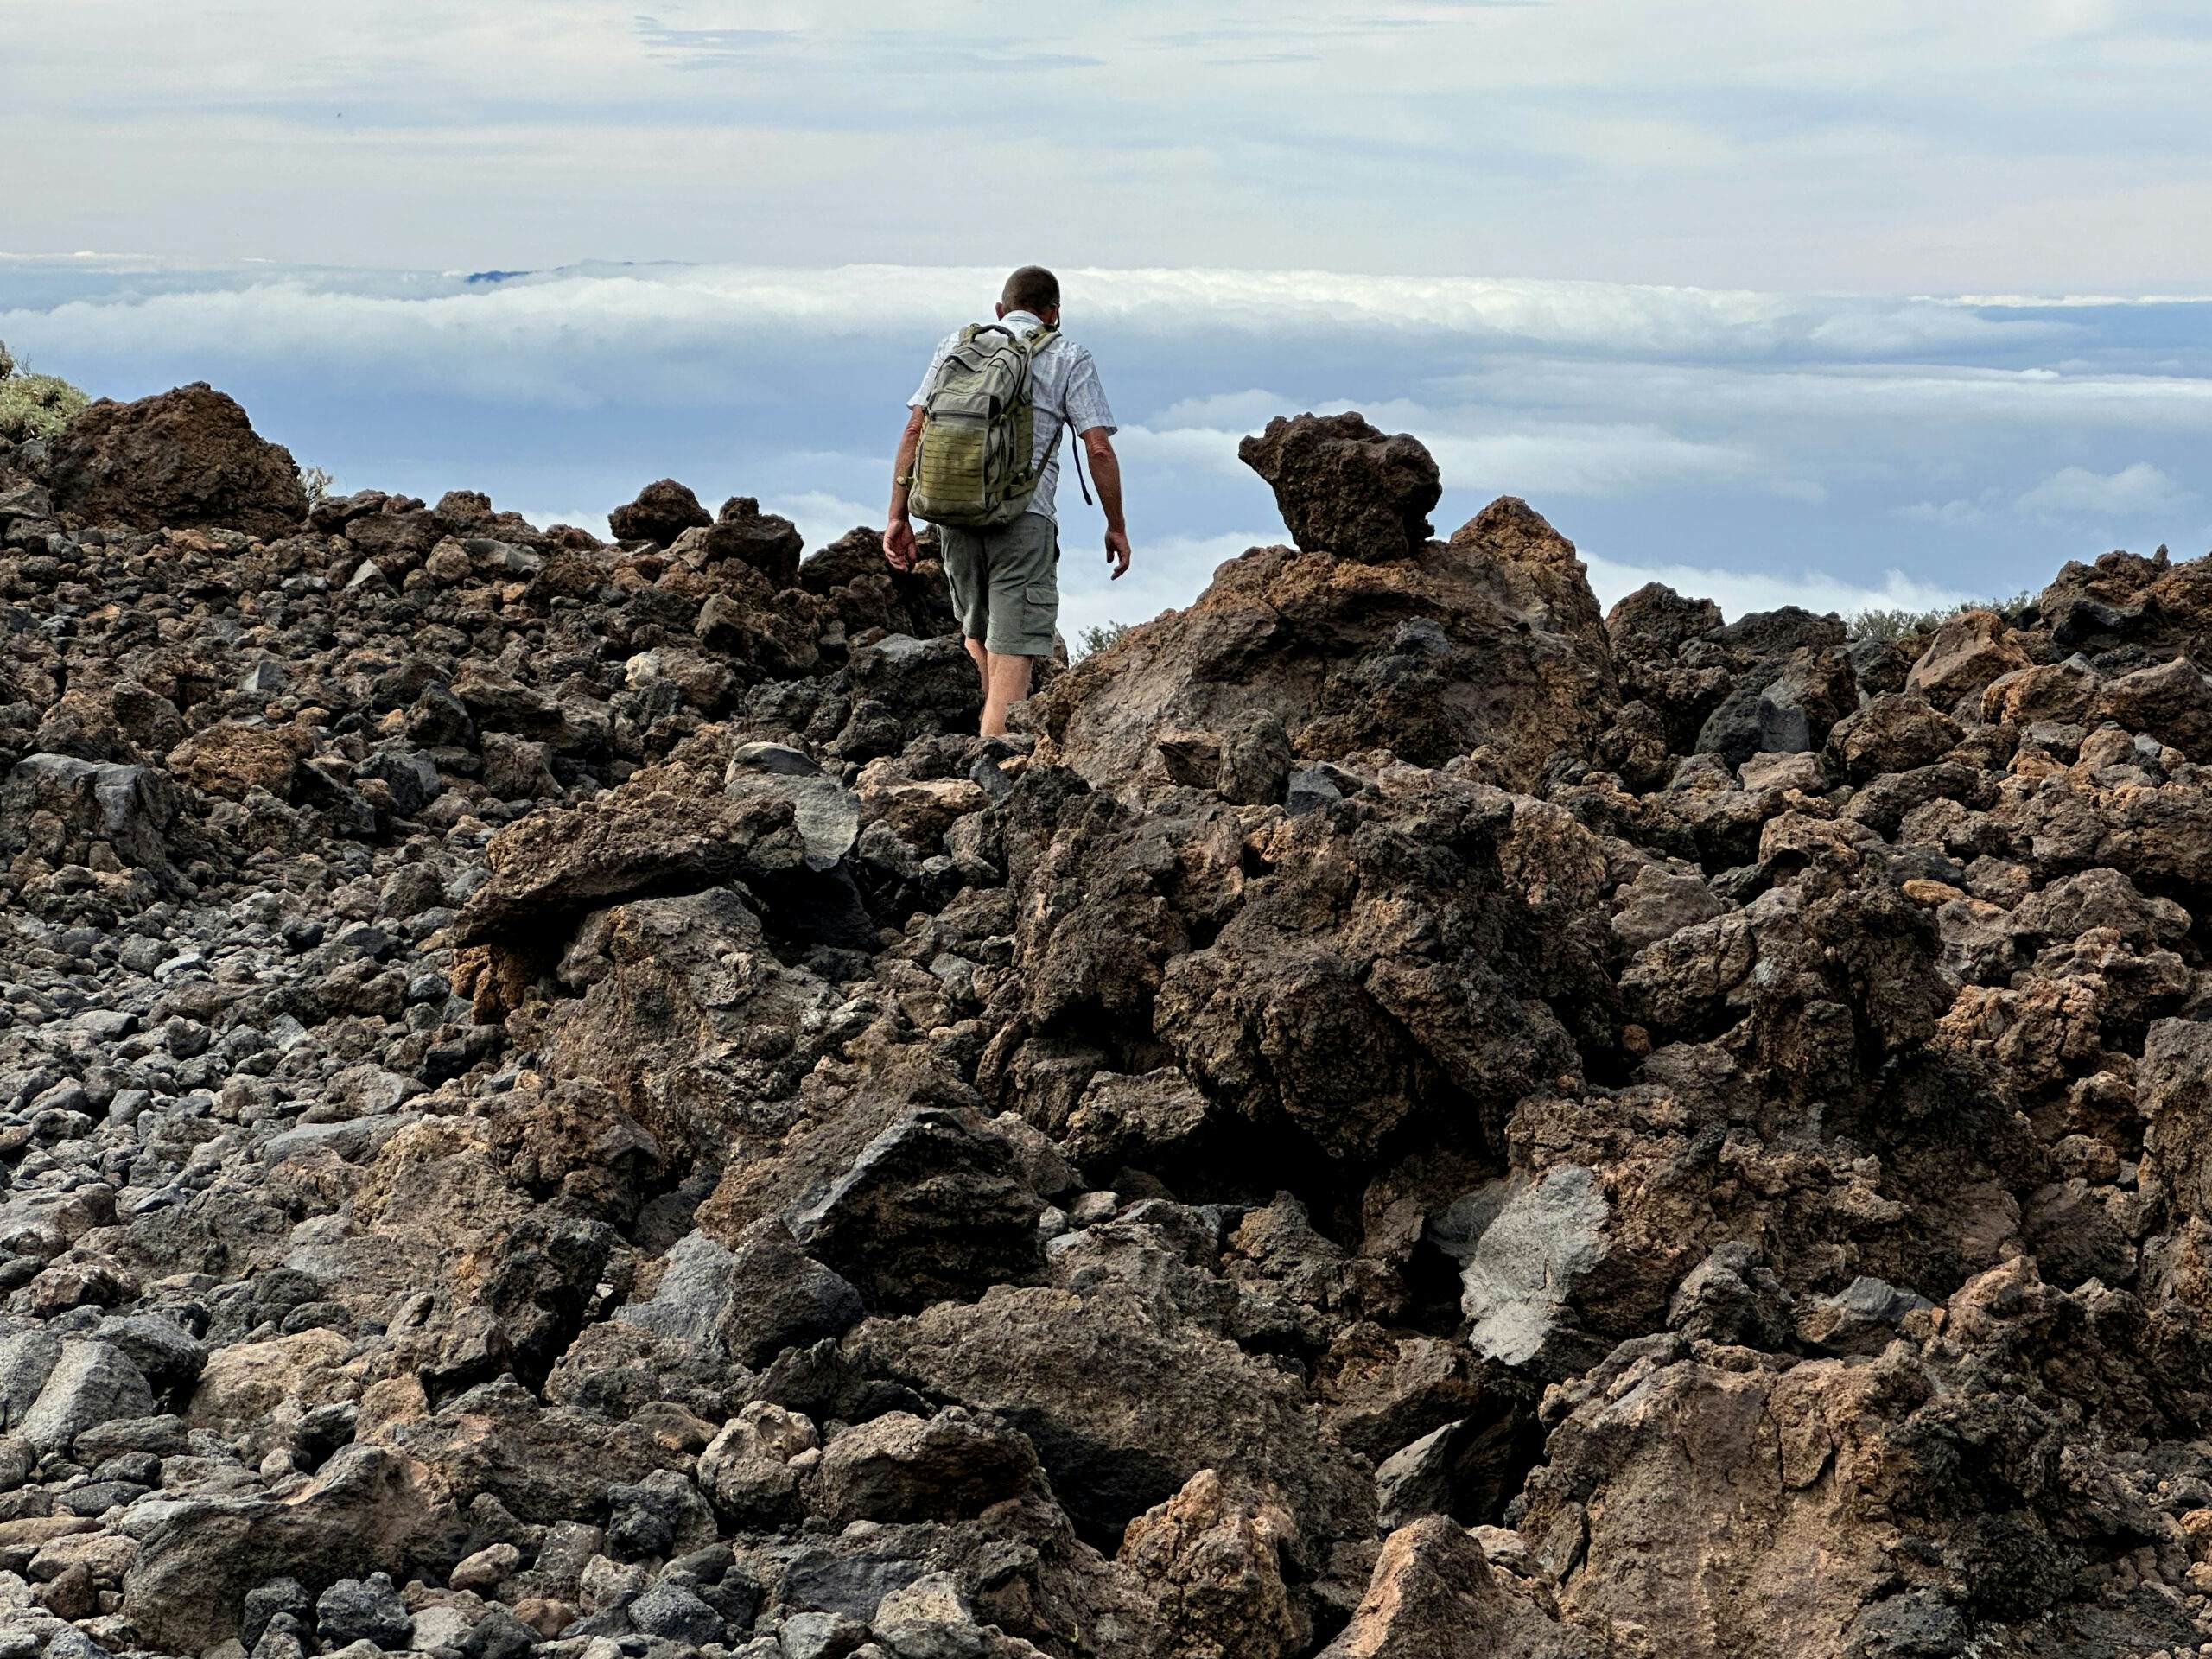 Hikers on the path through volcanic rock high above the clouds